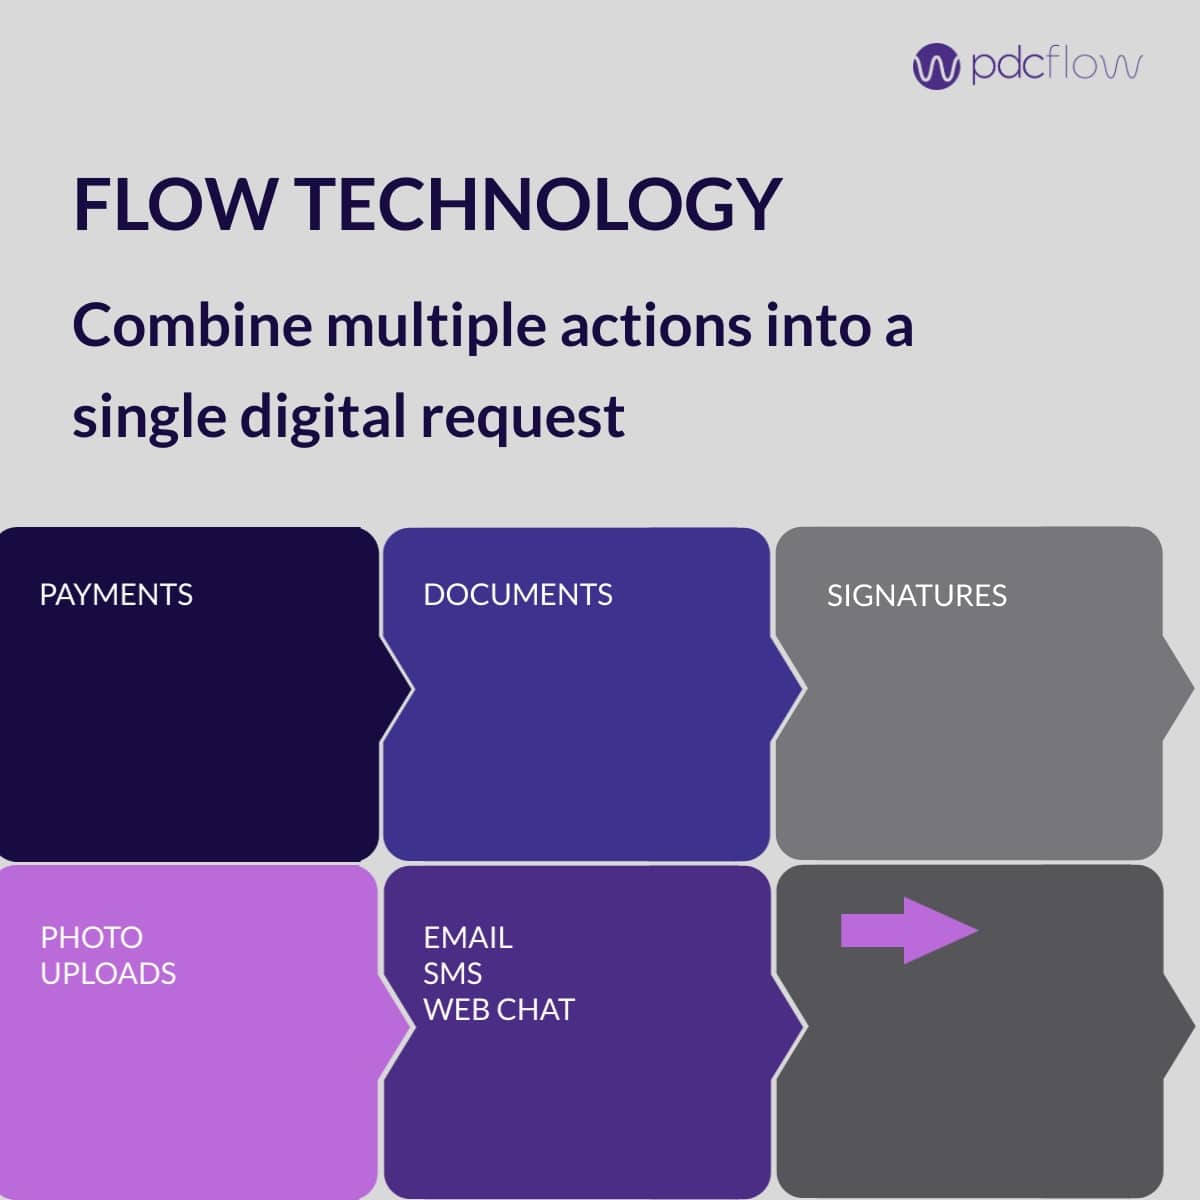 Flow Technology - combine multiple actions into a single digital request